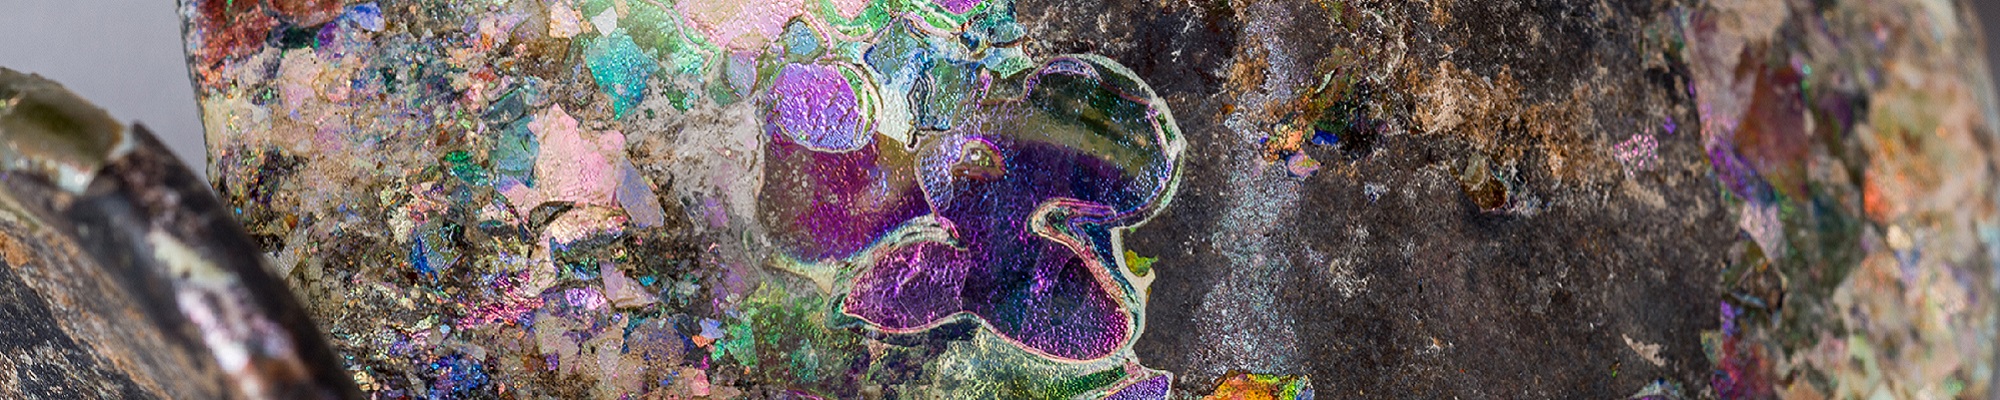 Image of a close up rock with reflective colourful elements.